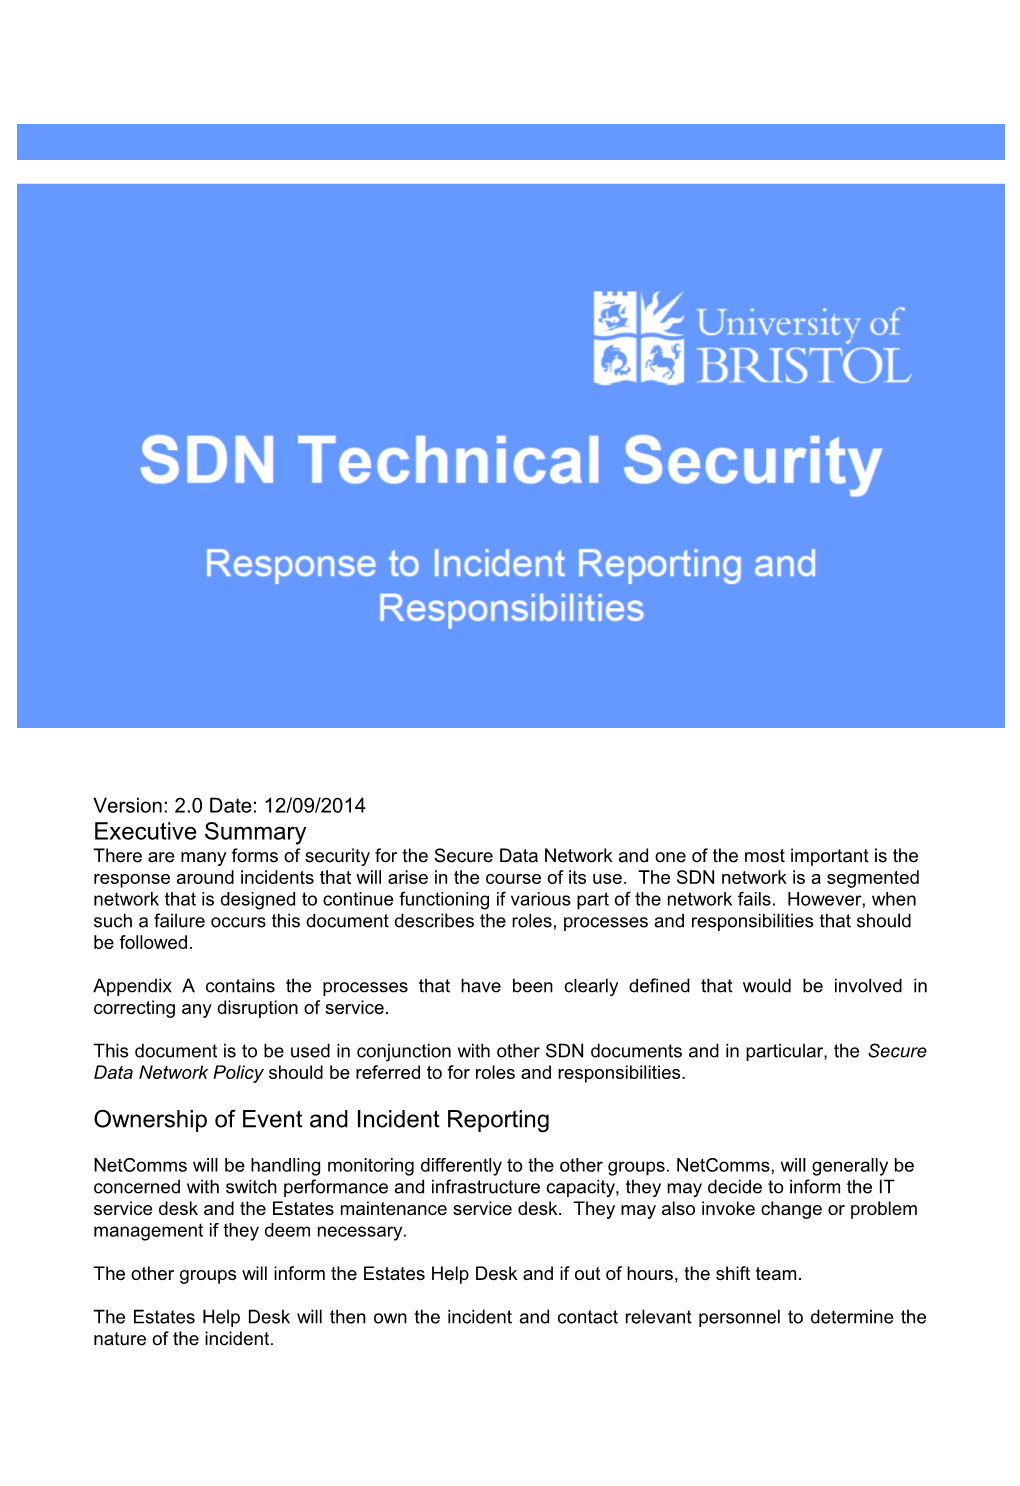 Ownership of Event and Incident Reporting